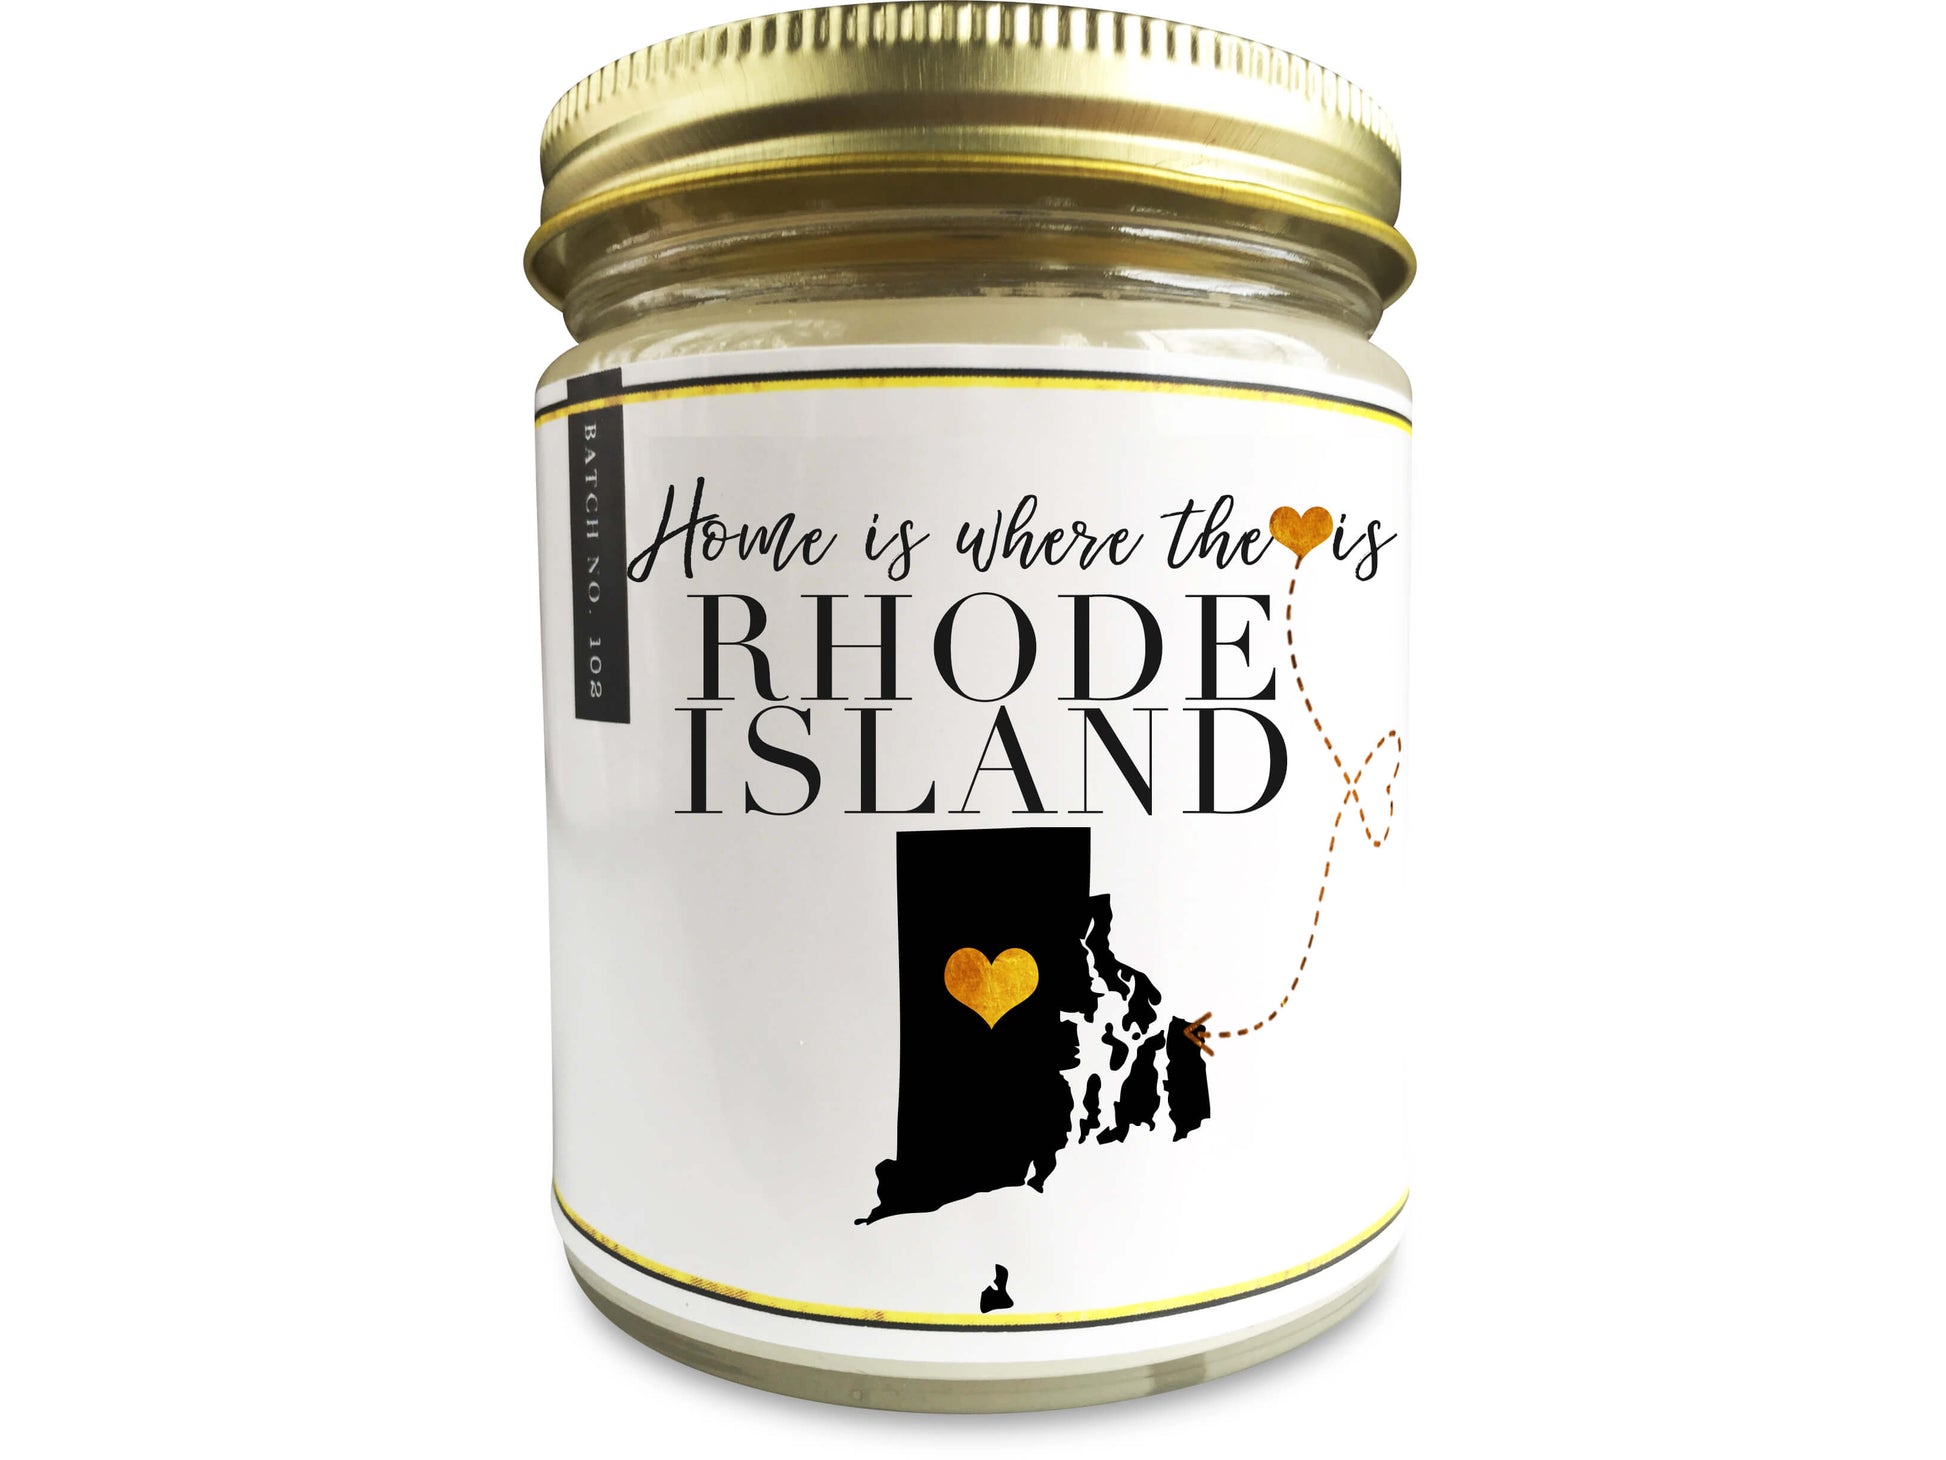 RHODE ISLAND Homesick Candle - PenPal Candle Co ™ - Personalize Candle Greetings